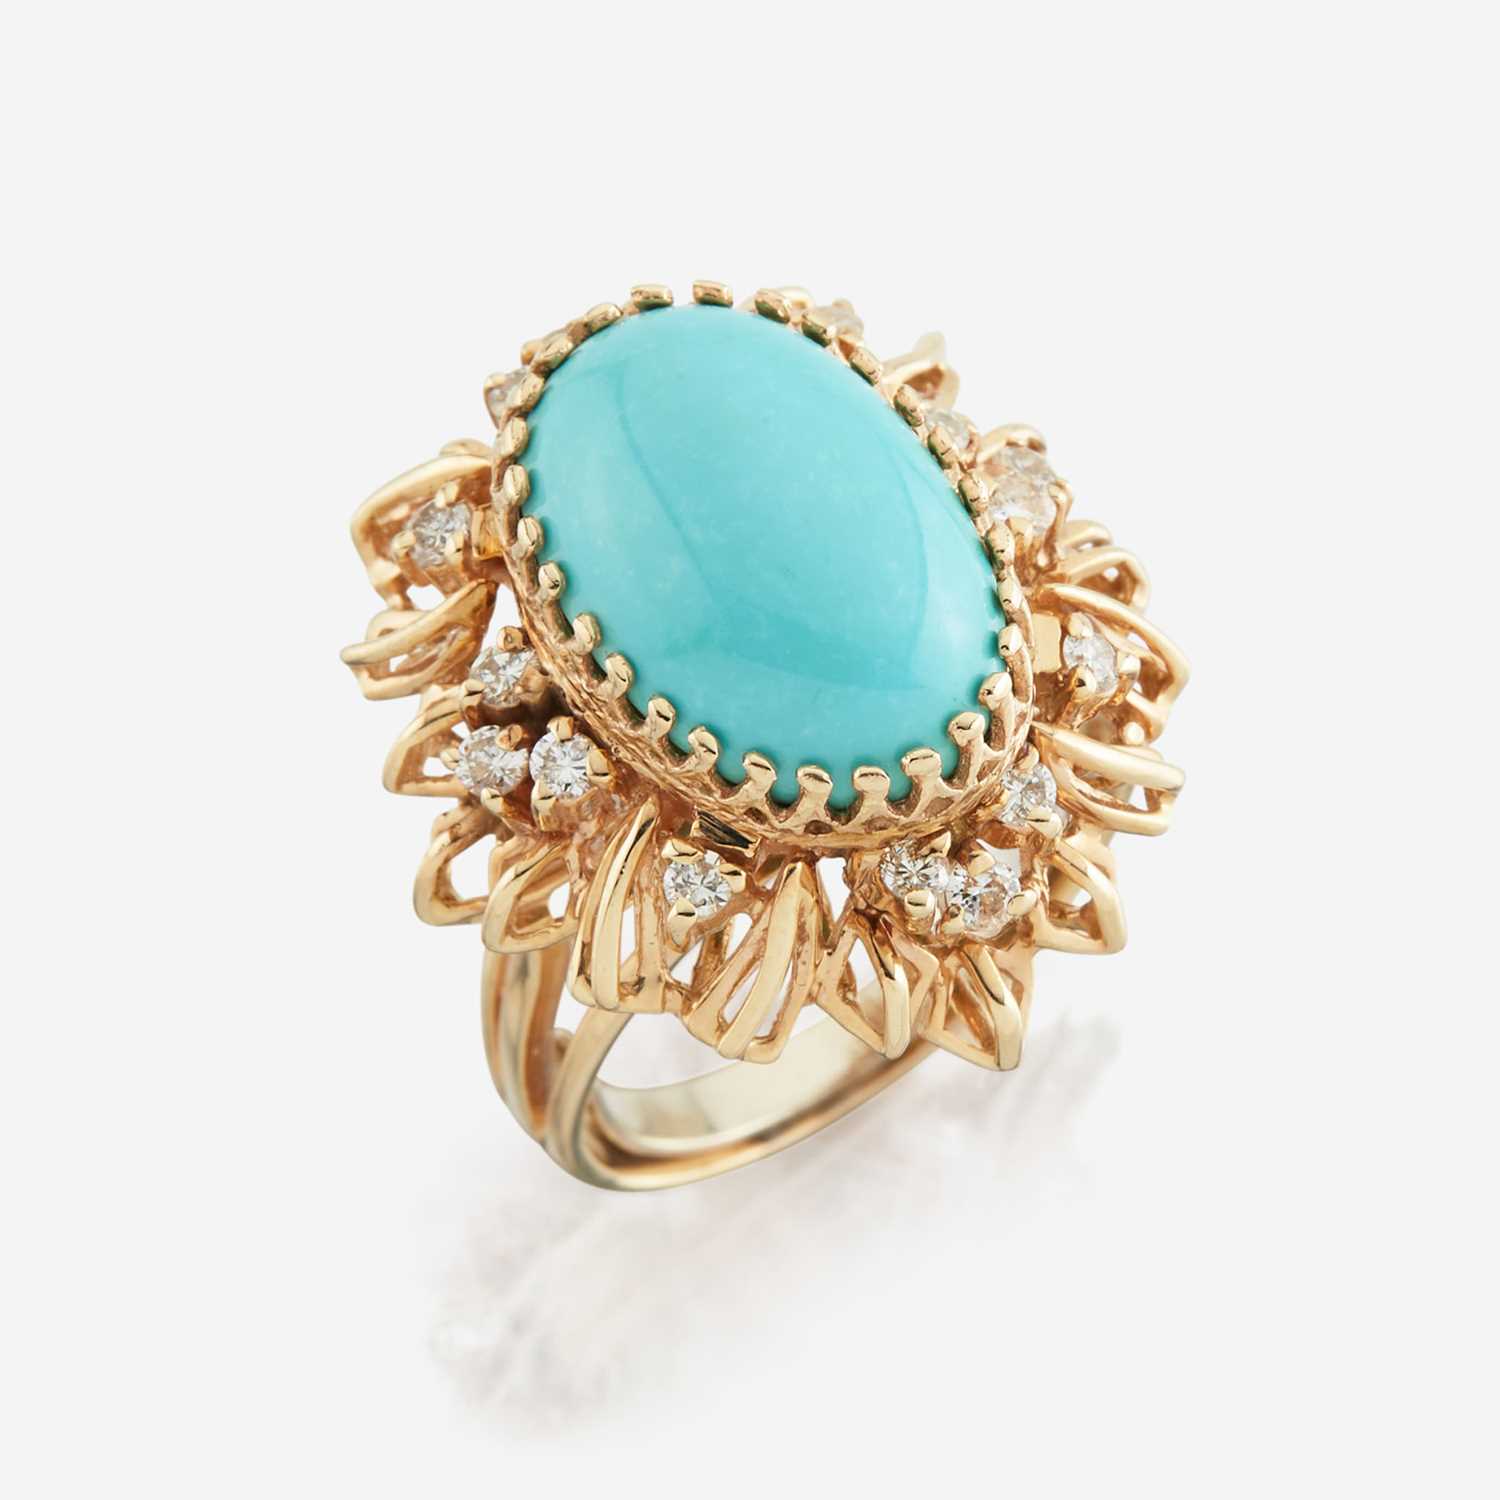 Lot 59 - A turquoise, diamond, and gold ring